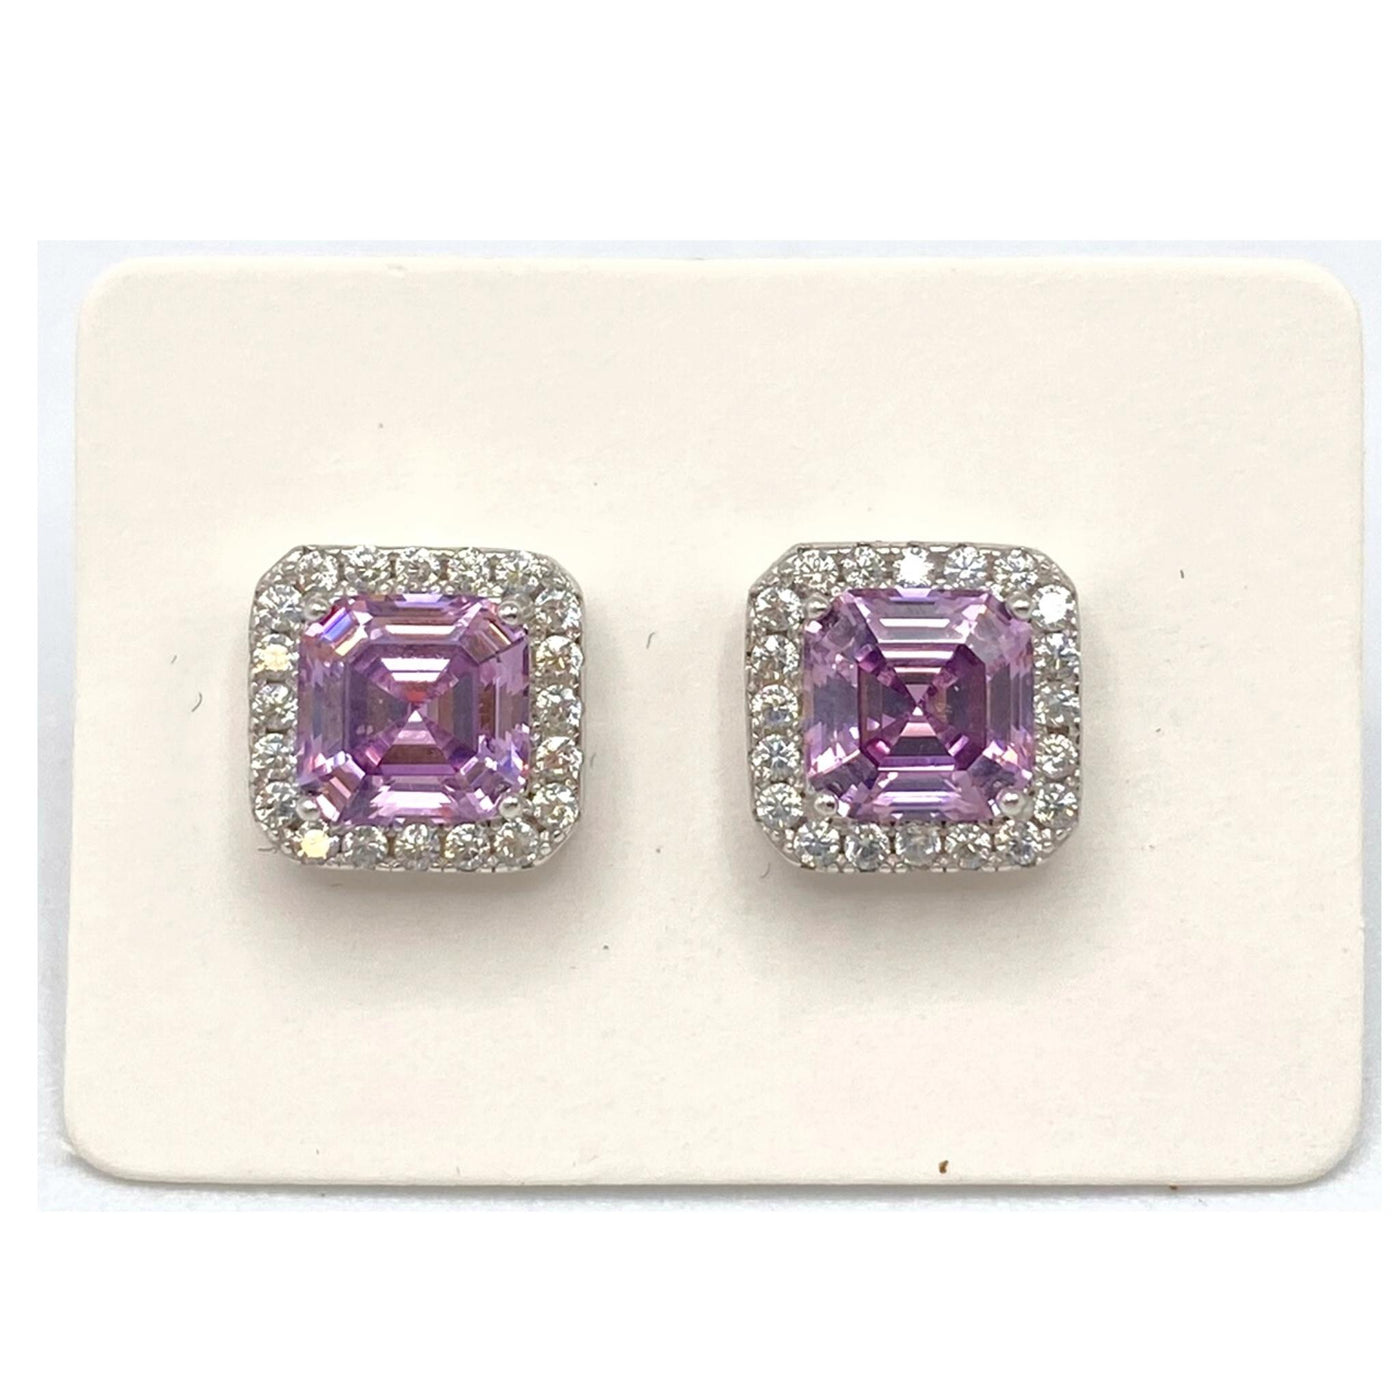 Pack of 5 silver stud earrings with asscher cut stones